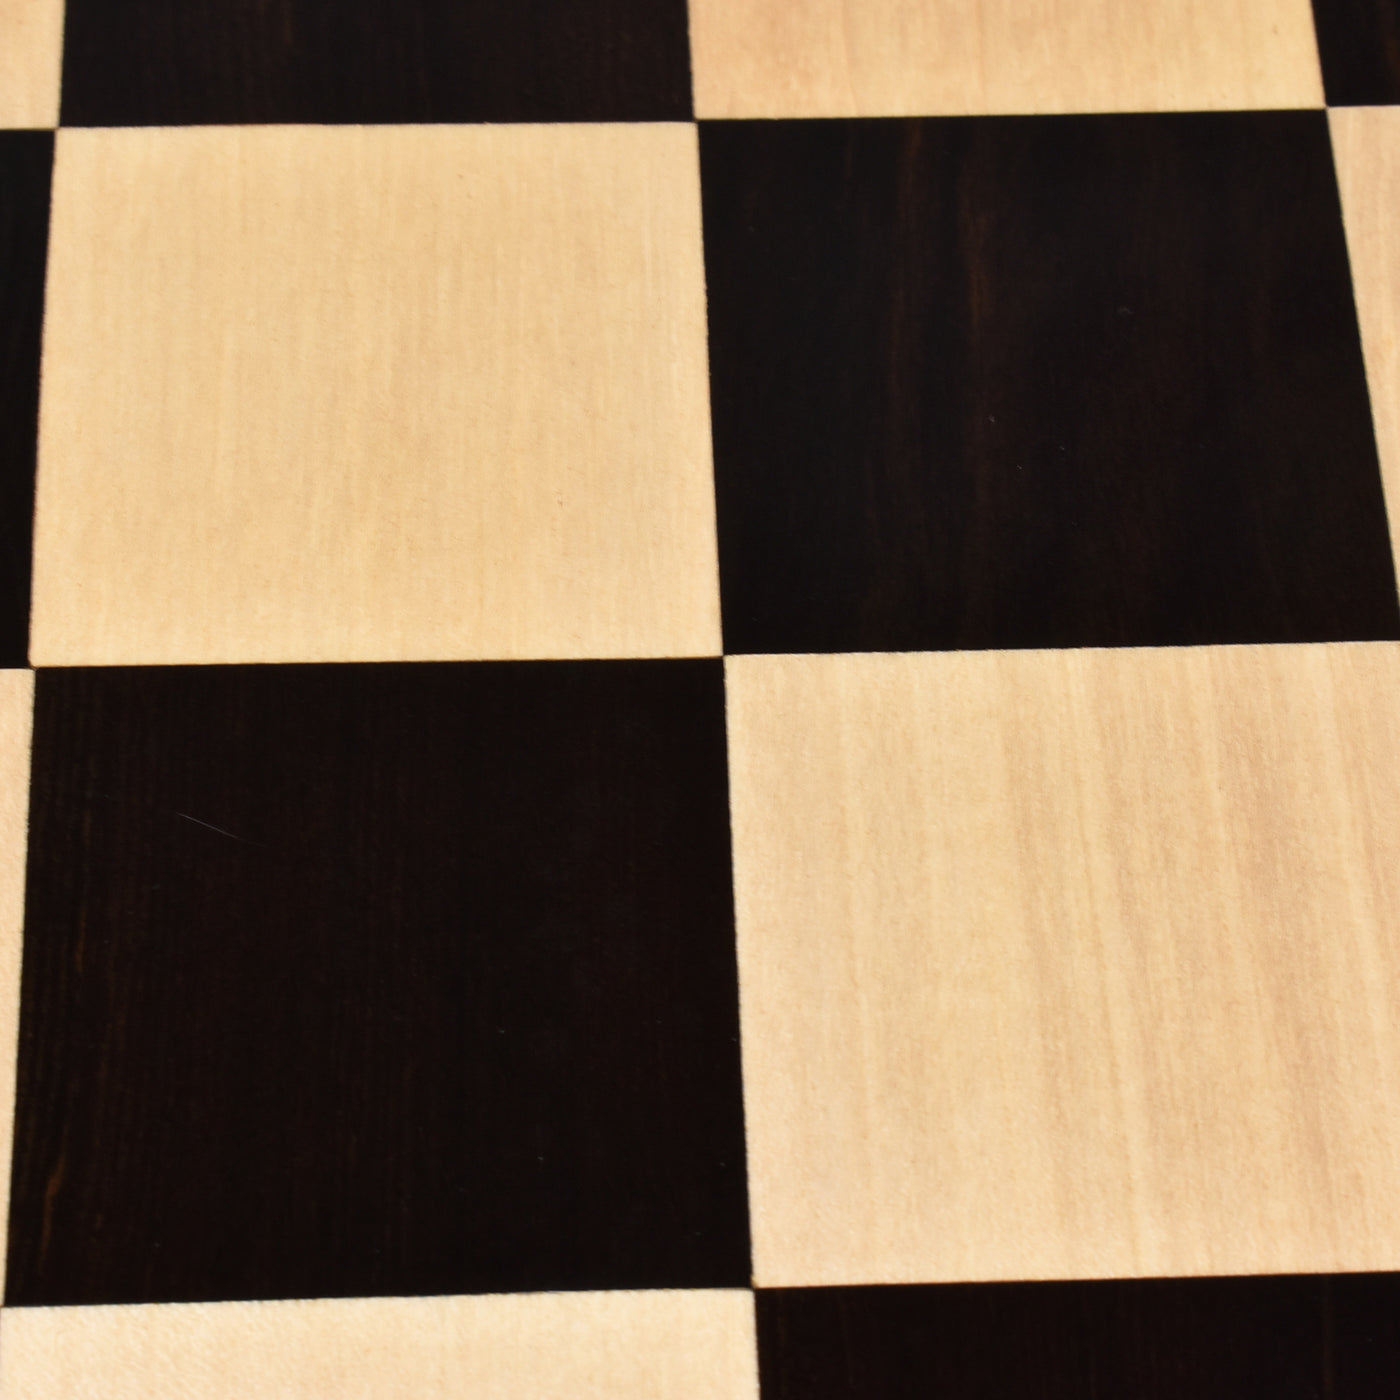 4.2" American Staunton Luxury Ebony Wood Chess Pieces with 21" Inlaid Ebony & Maple Wood Chess board and Leatherette Coffer Storage Box